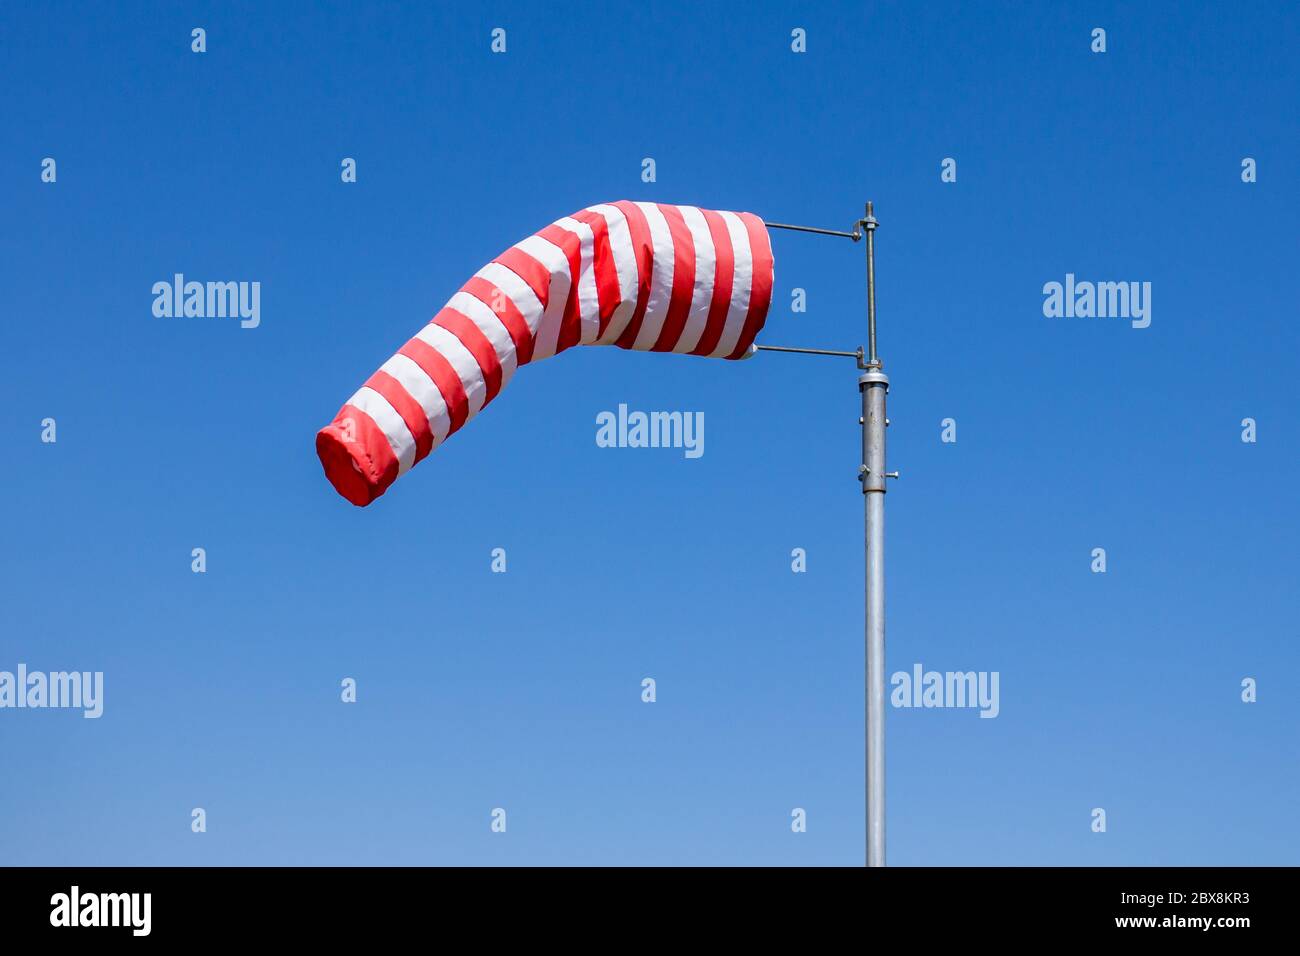 Windsock flag, wind speed meter, red and white stripes on blue background Stock Photo